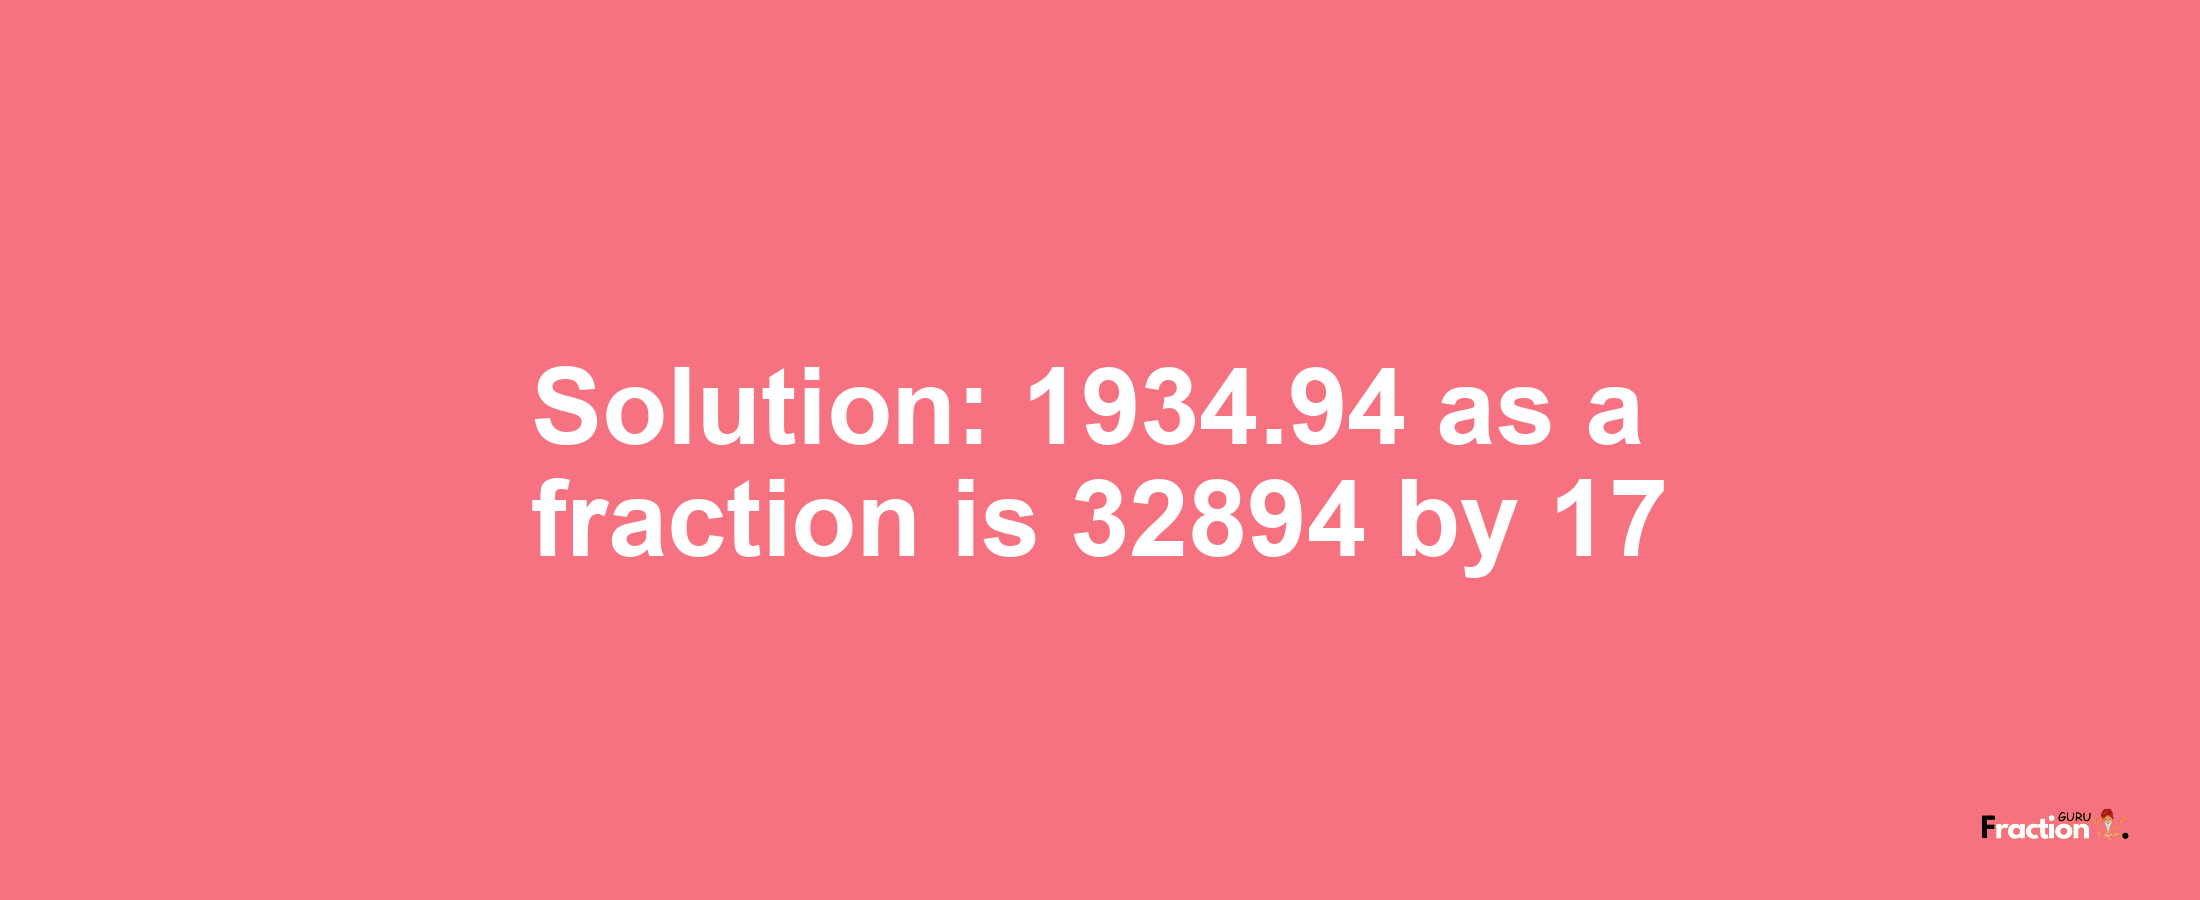 Solution:1934.94 as a fraction is 32894/17